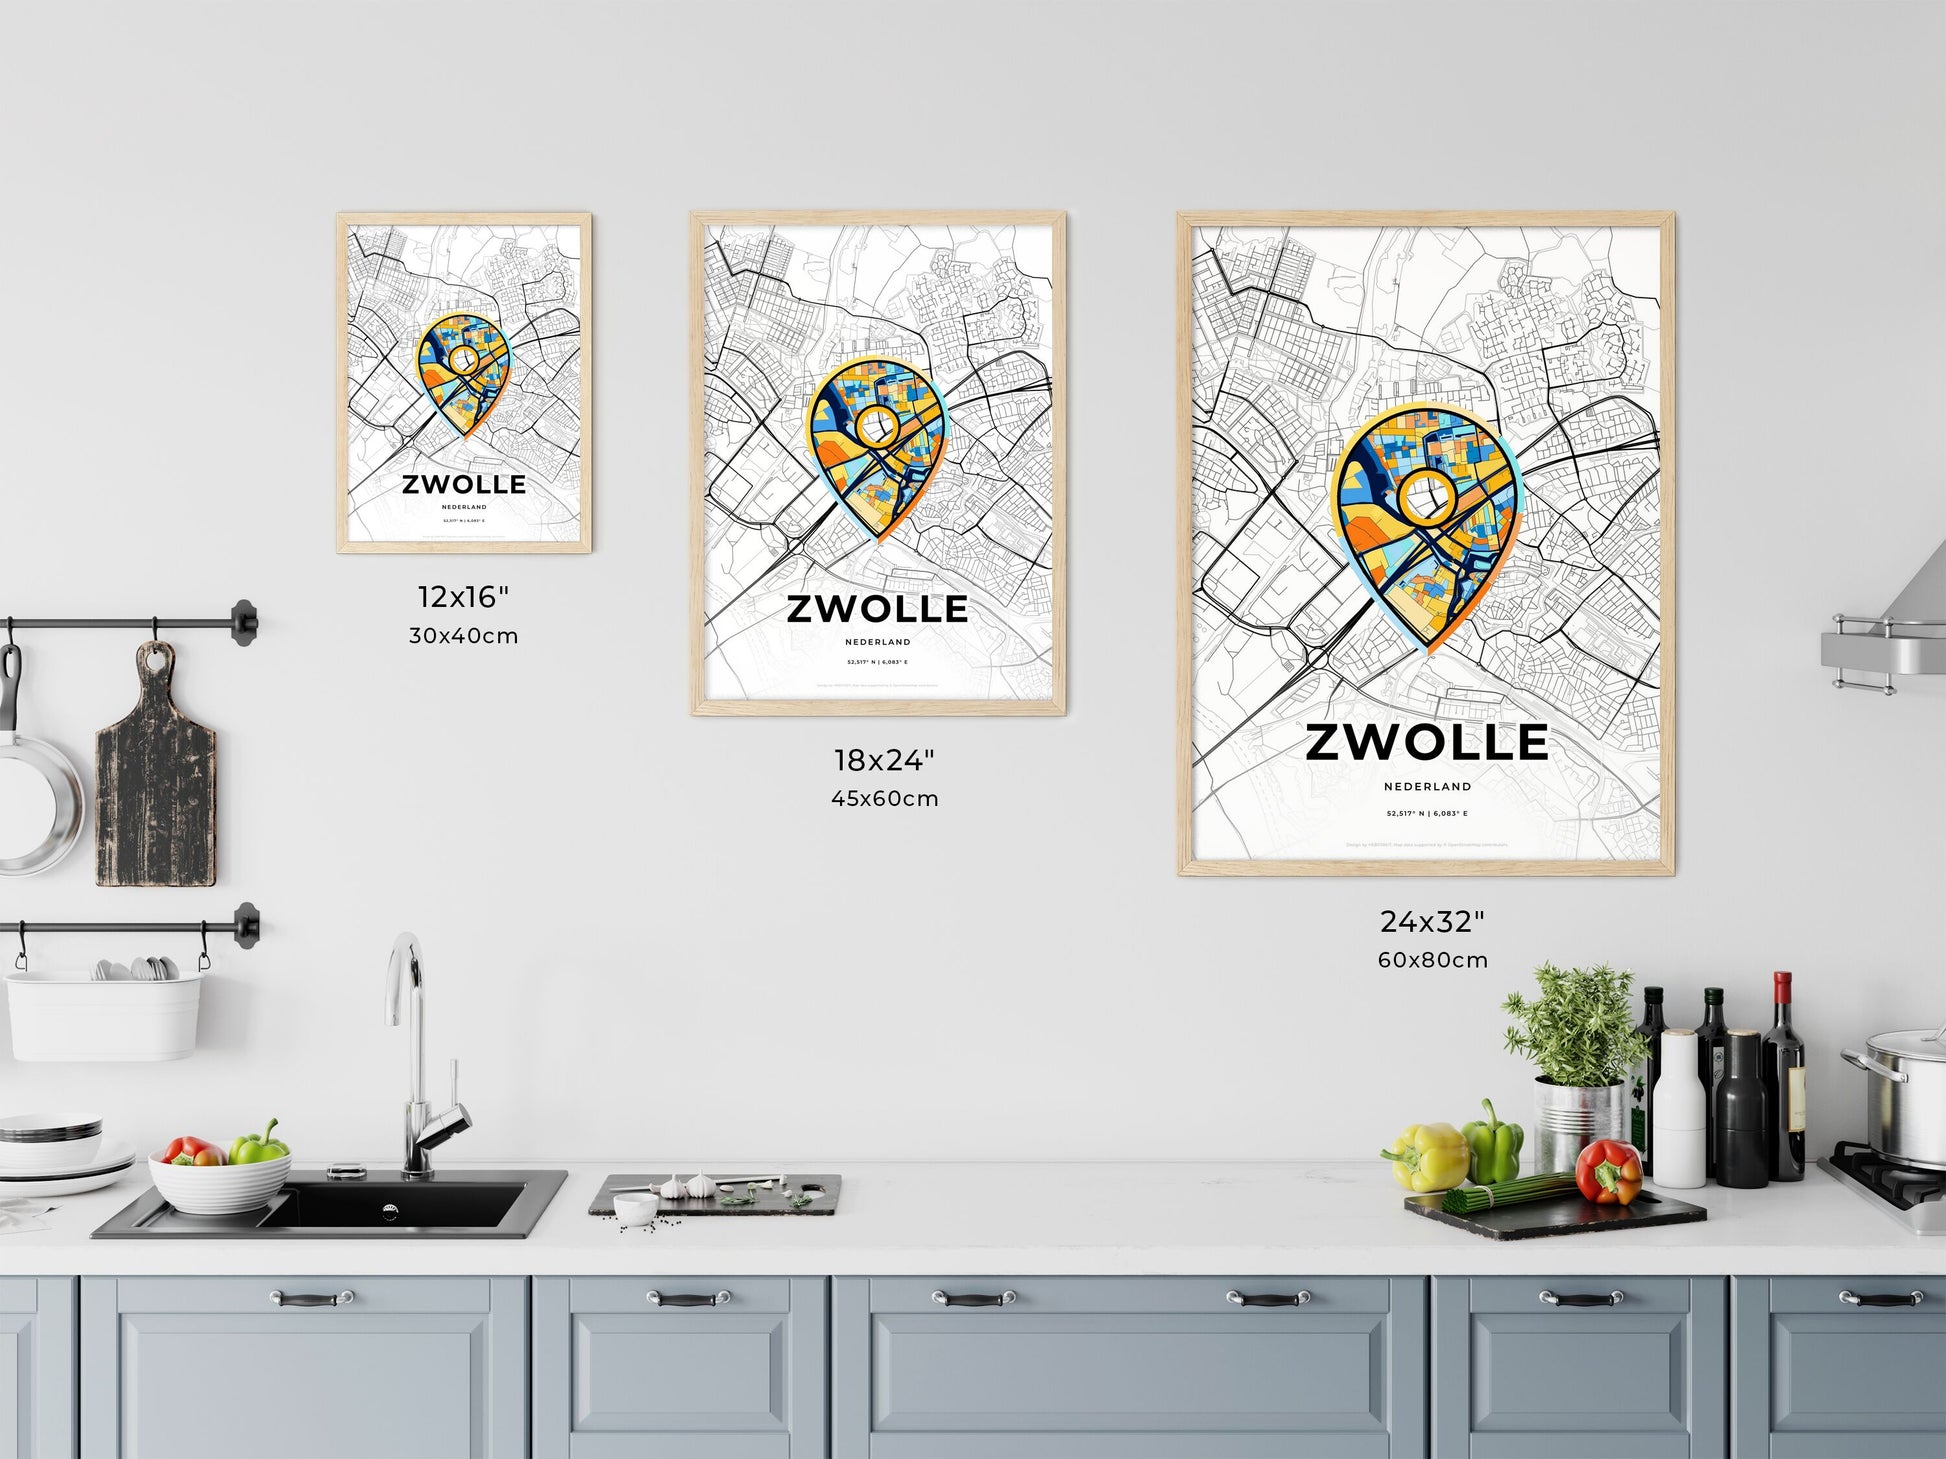 ZWOLLE NETHERLANDS minimal art map with a colorful icon. Where it all began, Couple map gift.